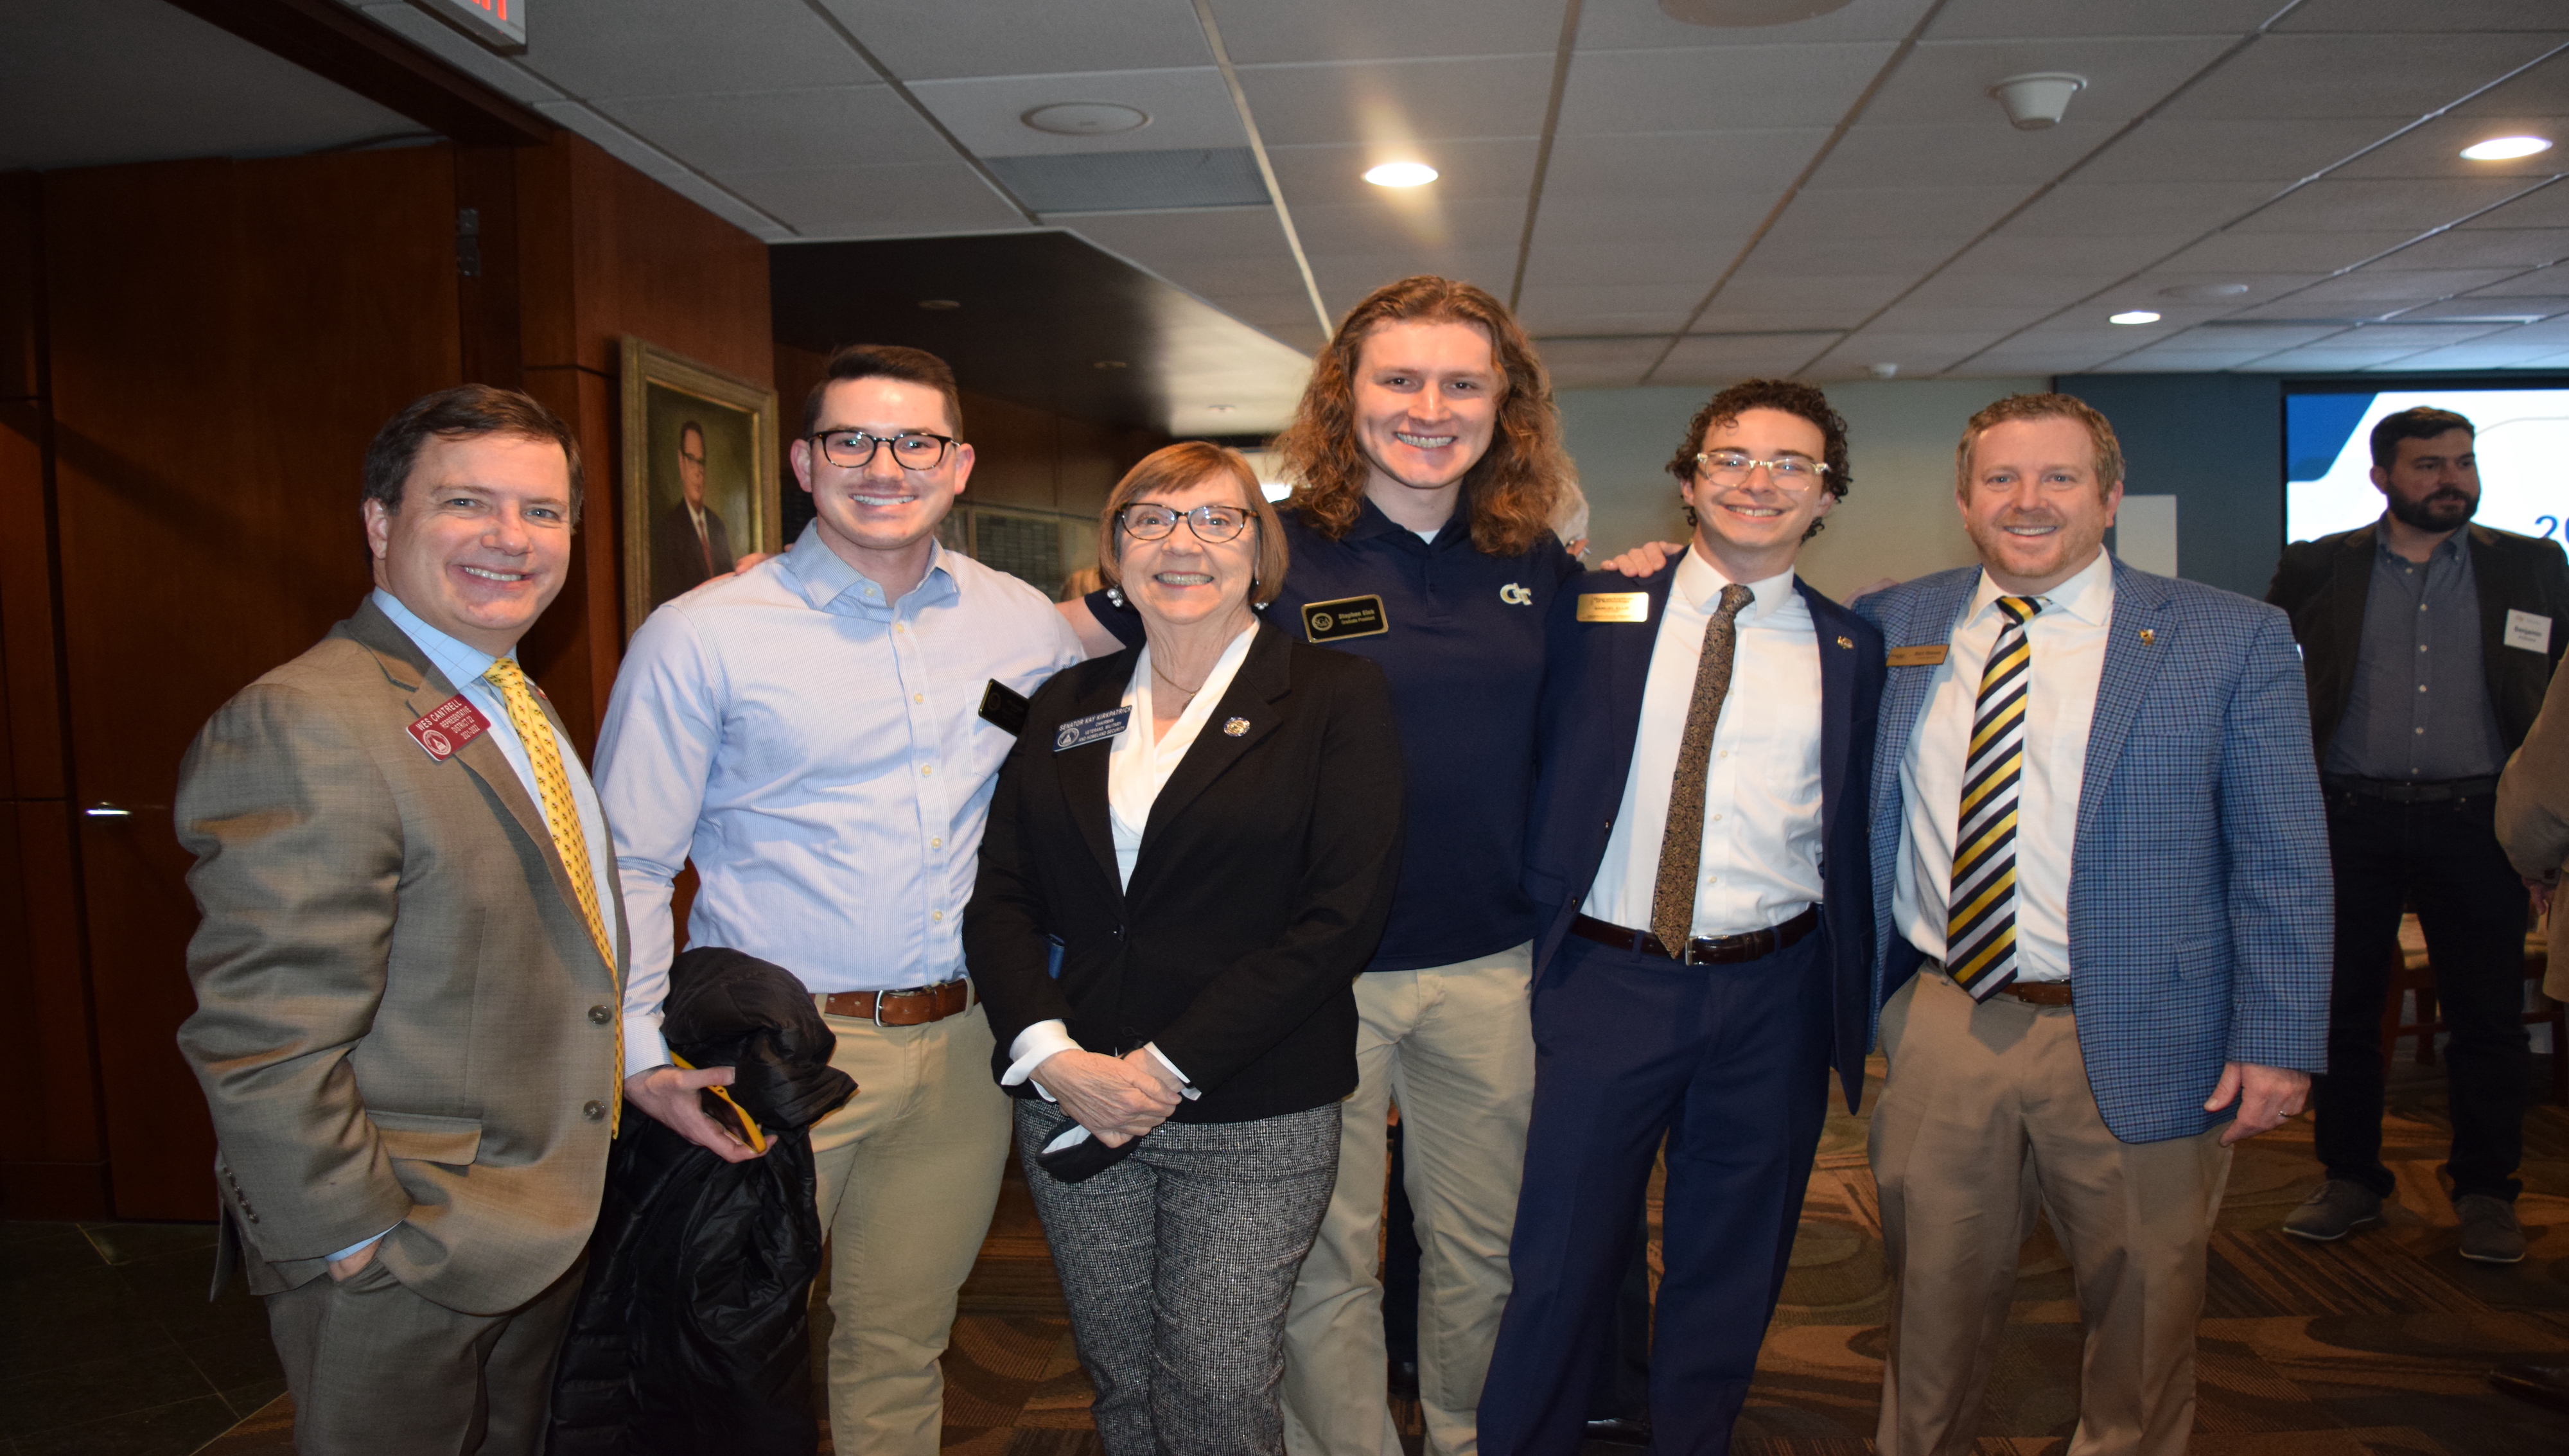 Legislators and student leaders attend the 2022 briefing